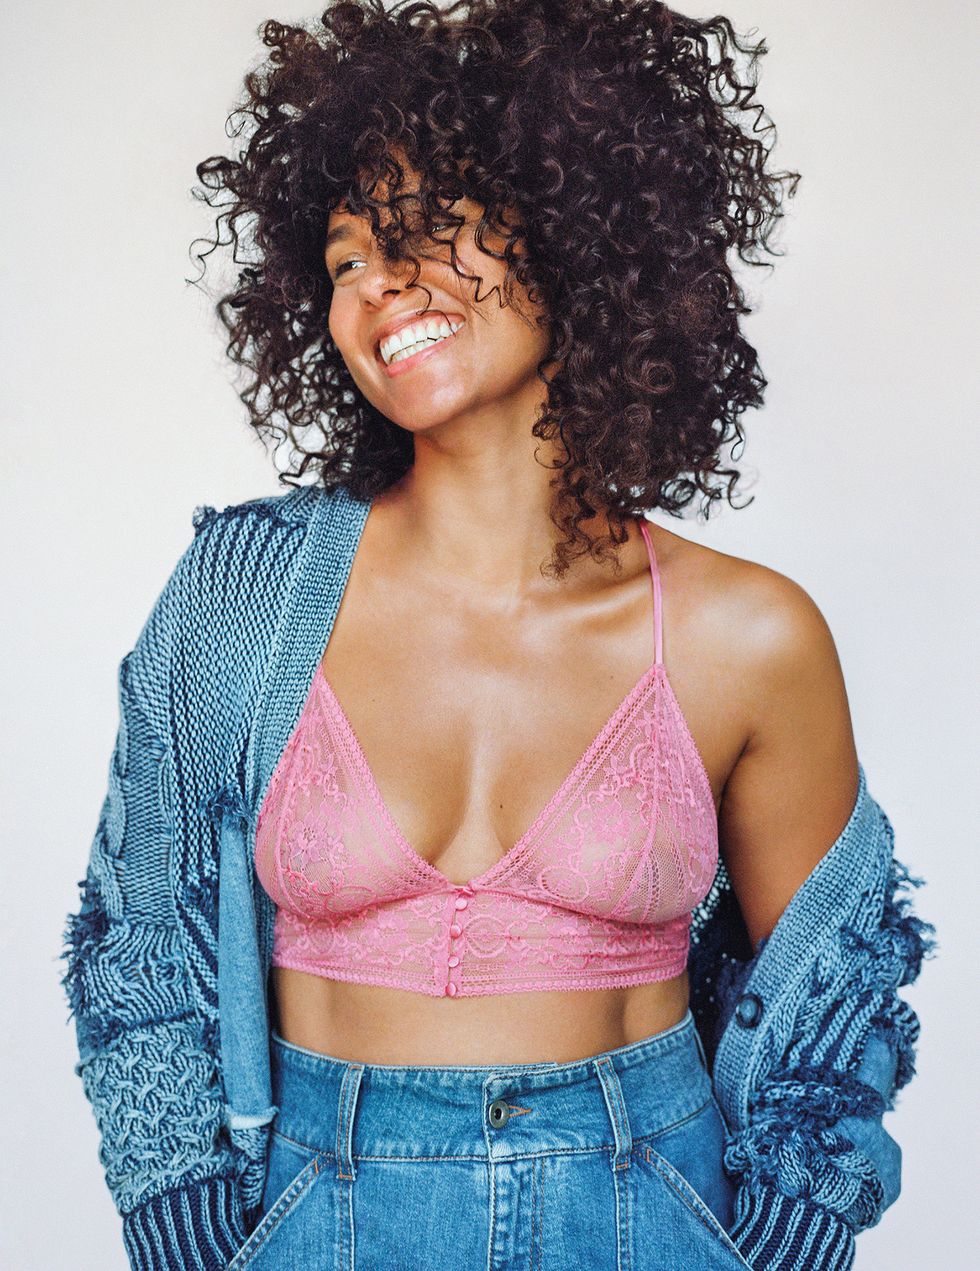 Hair, Clothing, Hairstyle, Beauty, Black hair, Pink, Shoulder, Photo shoot, Afro, Abdomen, 